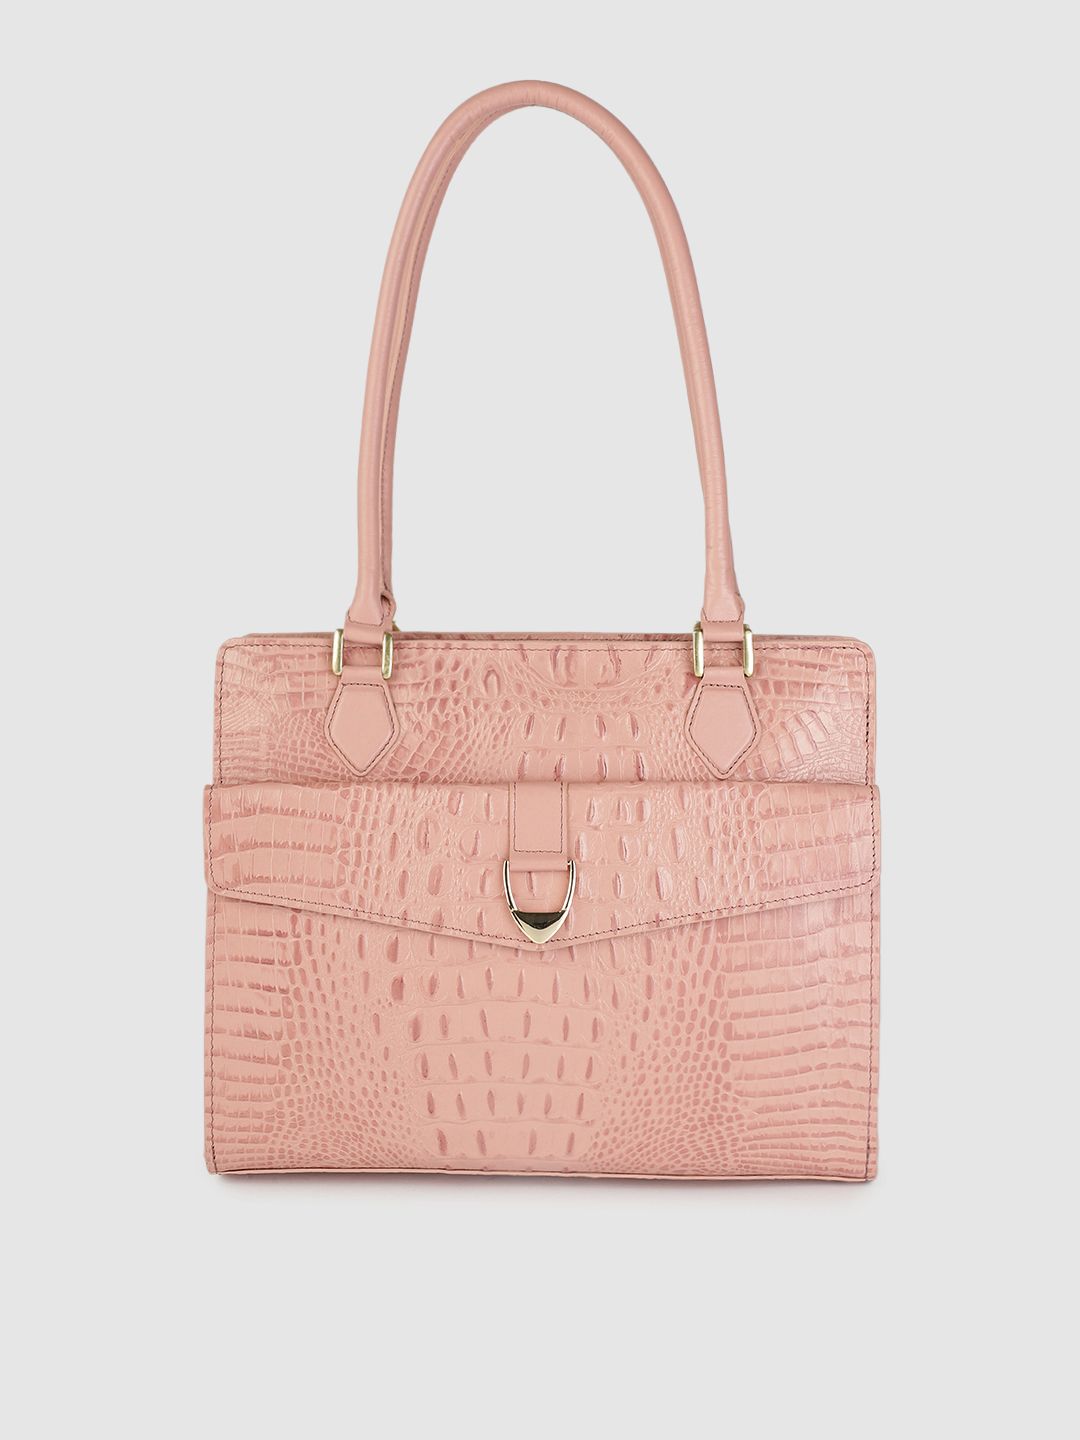 Hidesign Pink Textured Leather Shoulder Bag Price in India